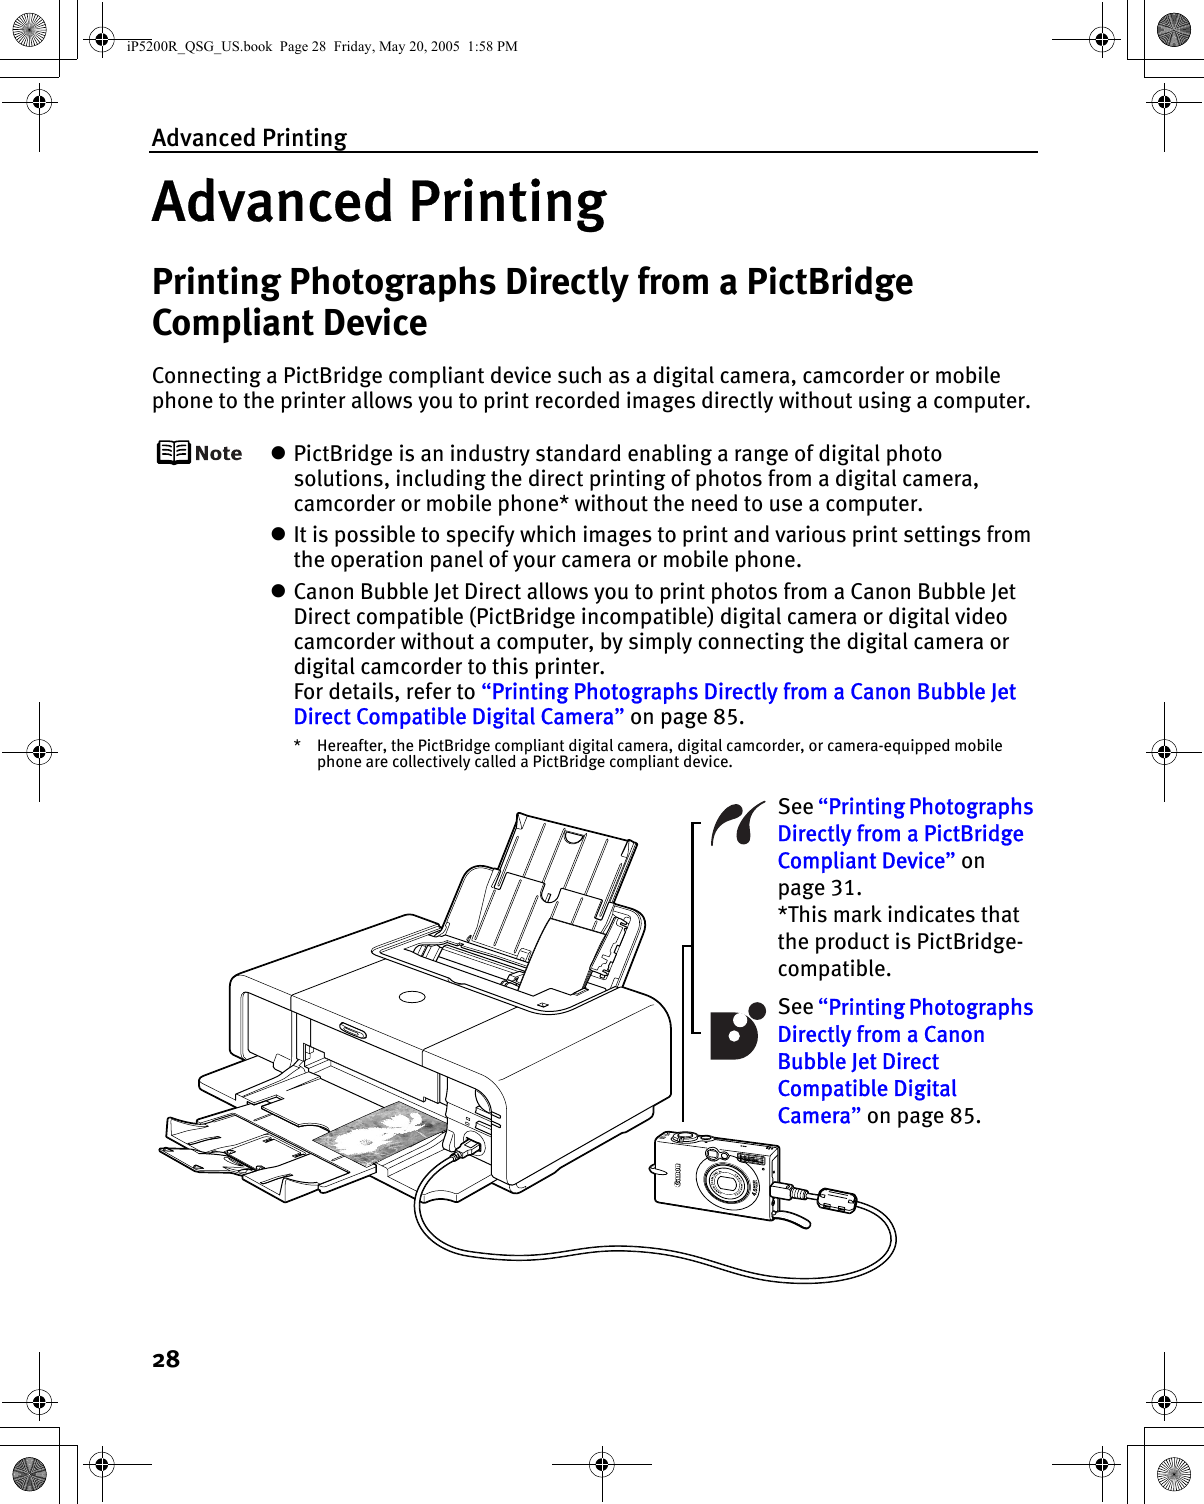 Advanced Printing28Advanced PrintingPrinting Photographs Directly from a PictBridge Compliant DeviceConnecting a PictBridge compliant device such as a digital camera, camcorder or mobile phone to the printer allows you to print recorded images directly without using a computer.zPictBridge is an industry standard enabling a range of digital photo solutions, including the direct printing of photos from a digital camera, camcorder or mobile phone* without the need to use a computer.zIt is possible to specify which images to print and various print settings from the operation panel of your camera or mobile phone.zCanon Bubble Jet Direct allows you to print photos from a Canon Bubble Jet Direct compatible (PictBridge incompatible) digital camera or digital video camcorder without a computer, by simply connecting the digital camera or digital camcorder to this printer.For details, refer to “Printing Photographs Directly from a Canon Bubble Jet Direct Compatible Digital Camera” on page 85.* Hereafter, the PictBridge compliant digital camera, digital camcorder, or camera-equipped mobile phone are collectively called a PictBridge compliant device.See “Printing Photographs Directly from a Canon Bubble Jet Direct Compatible Digital Camera” on page 85.See “Printing Photographs Directly from a PictBridge Compliant Device” on page 31.*This mark indicates that the product is PictBridge-compatible.iP5200R_QSG_US.book  Page 28  Friday, May 20, 2005  1:58 PM